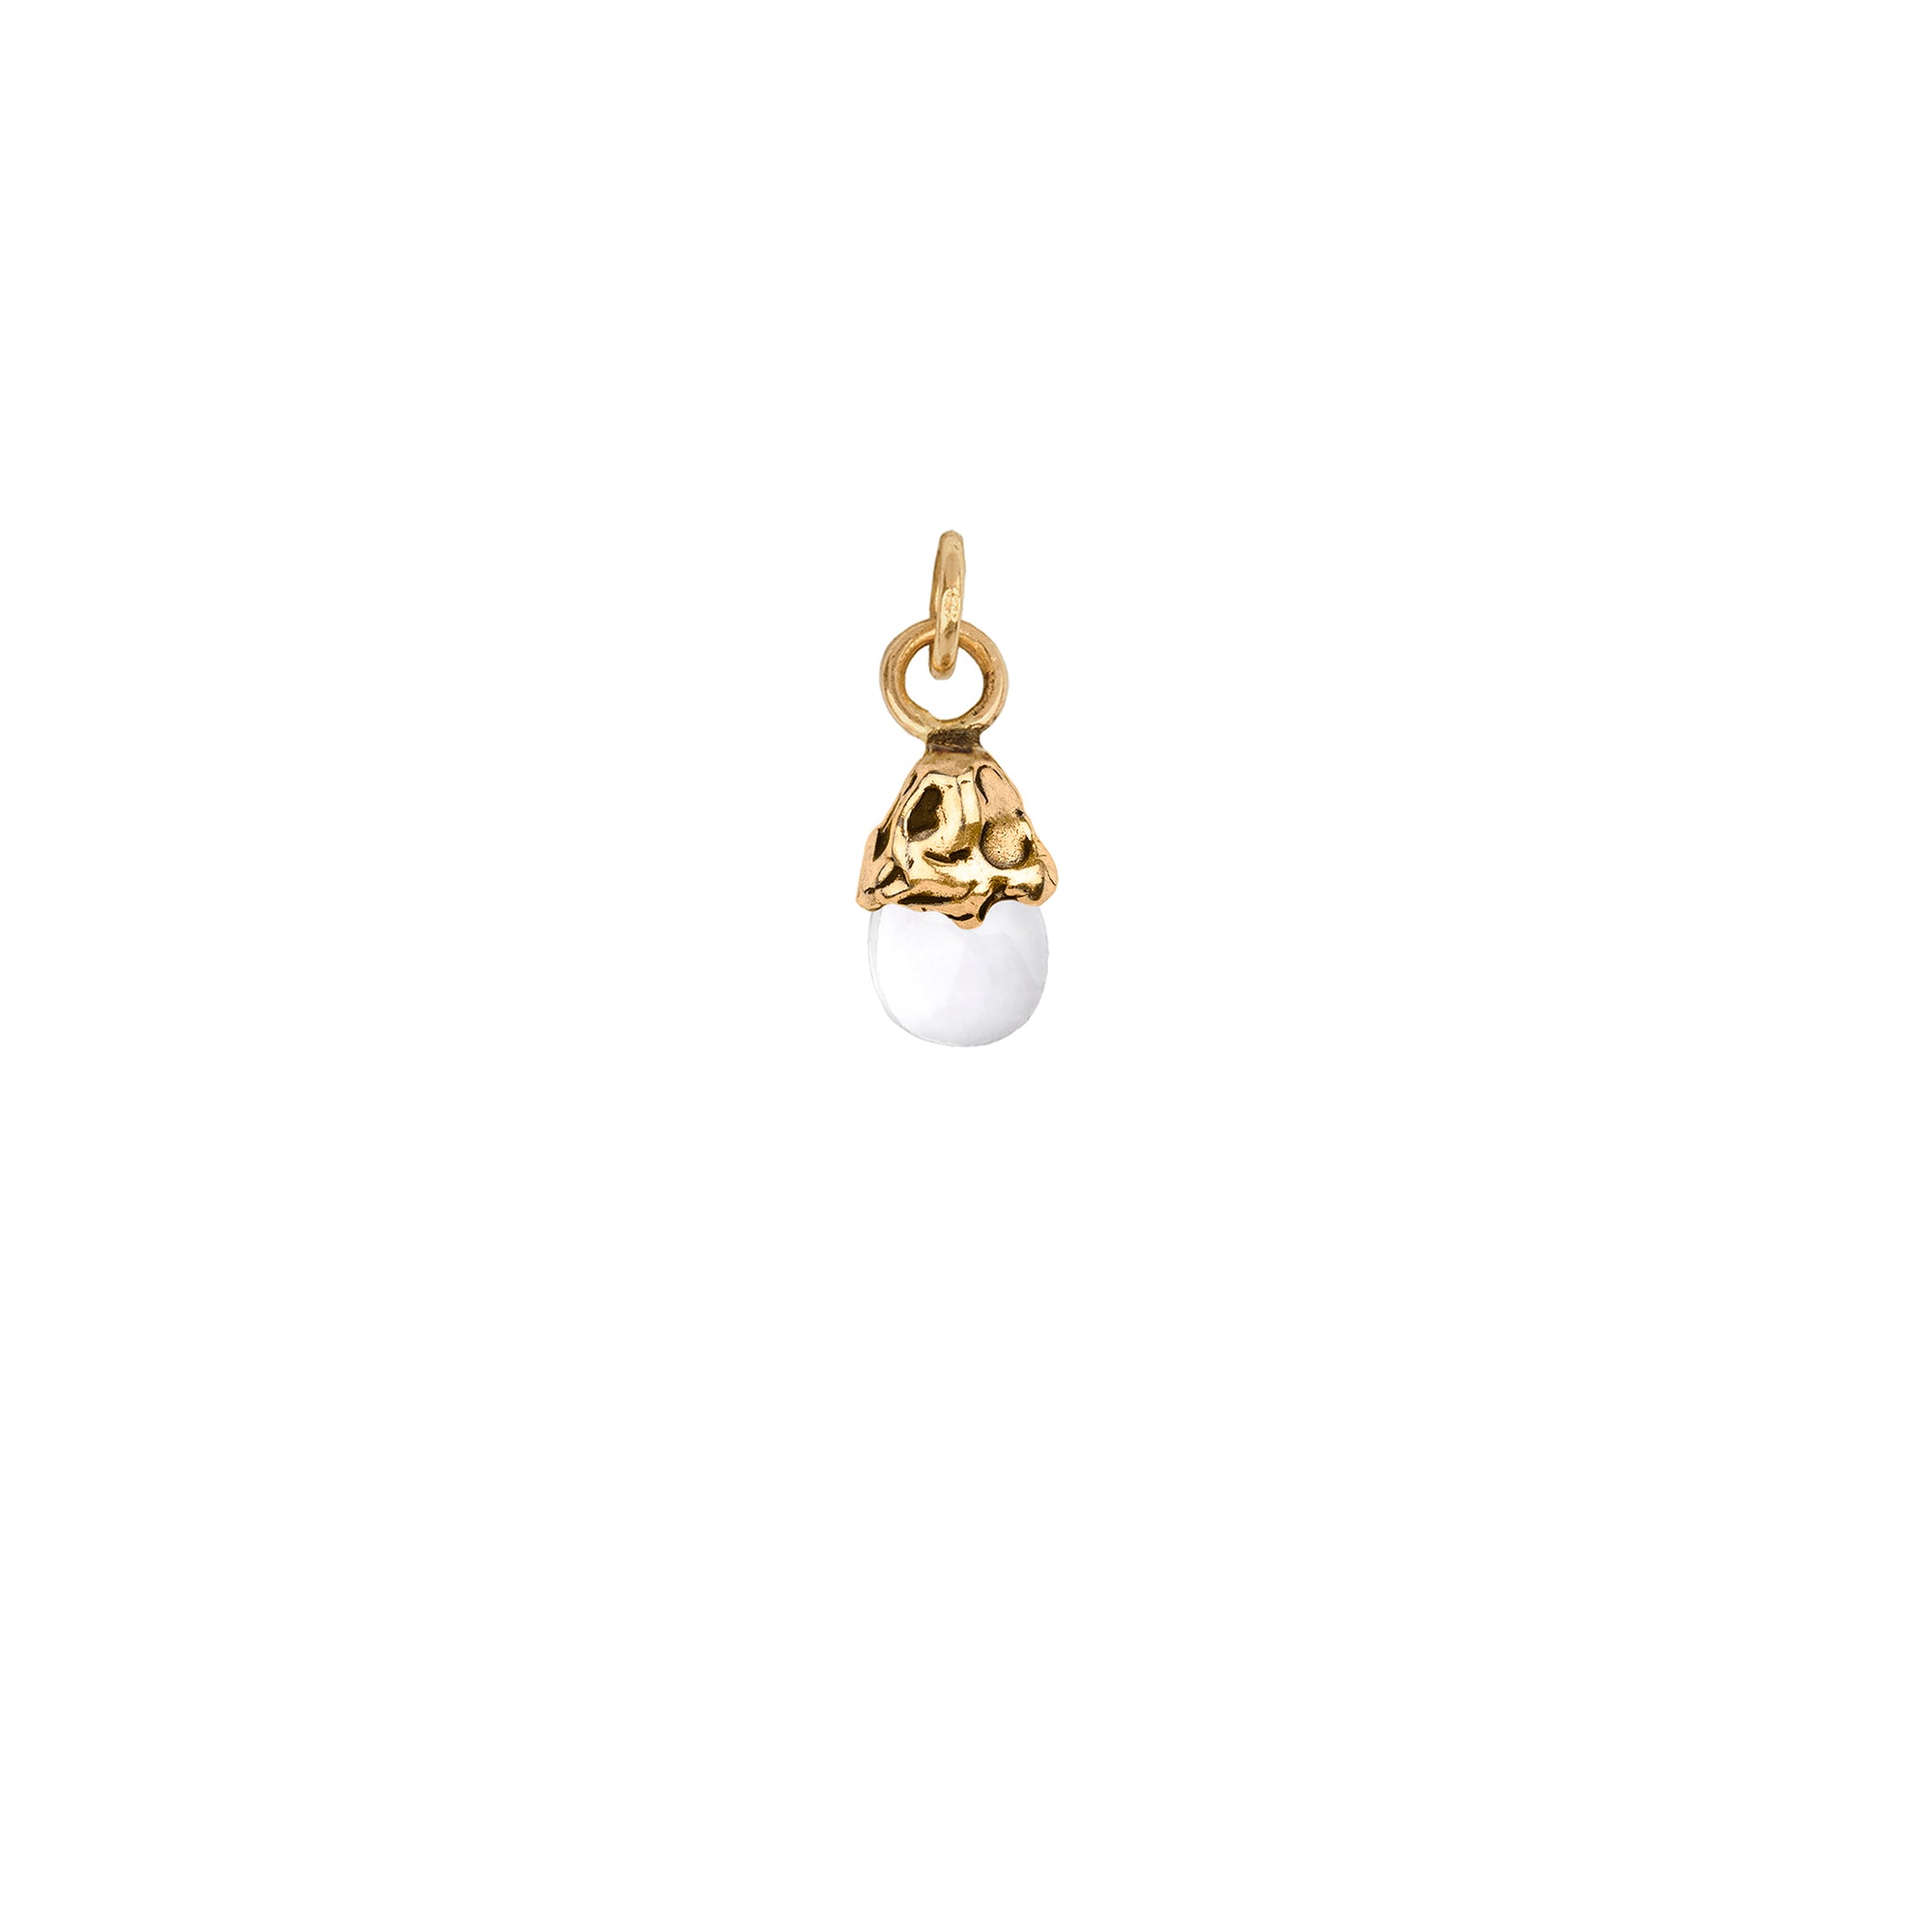 Serenity 14K Gold Capped Attraction Charm